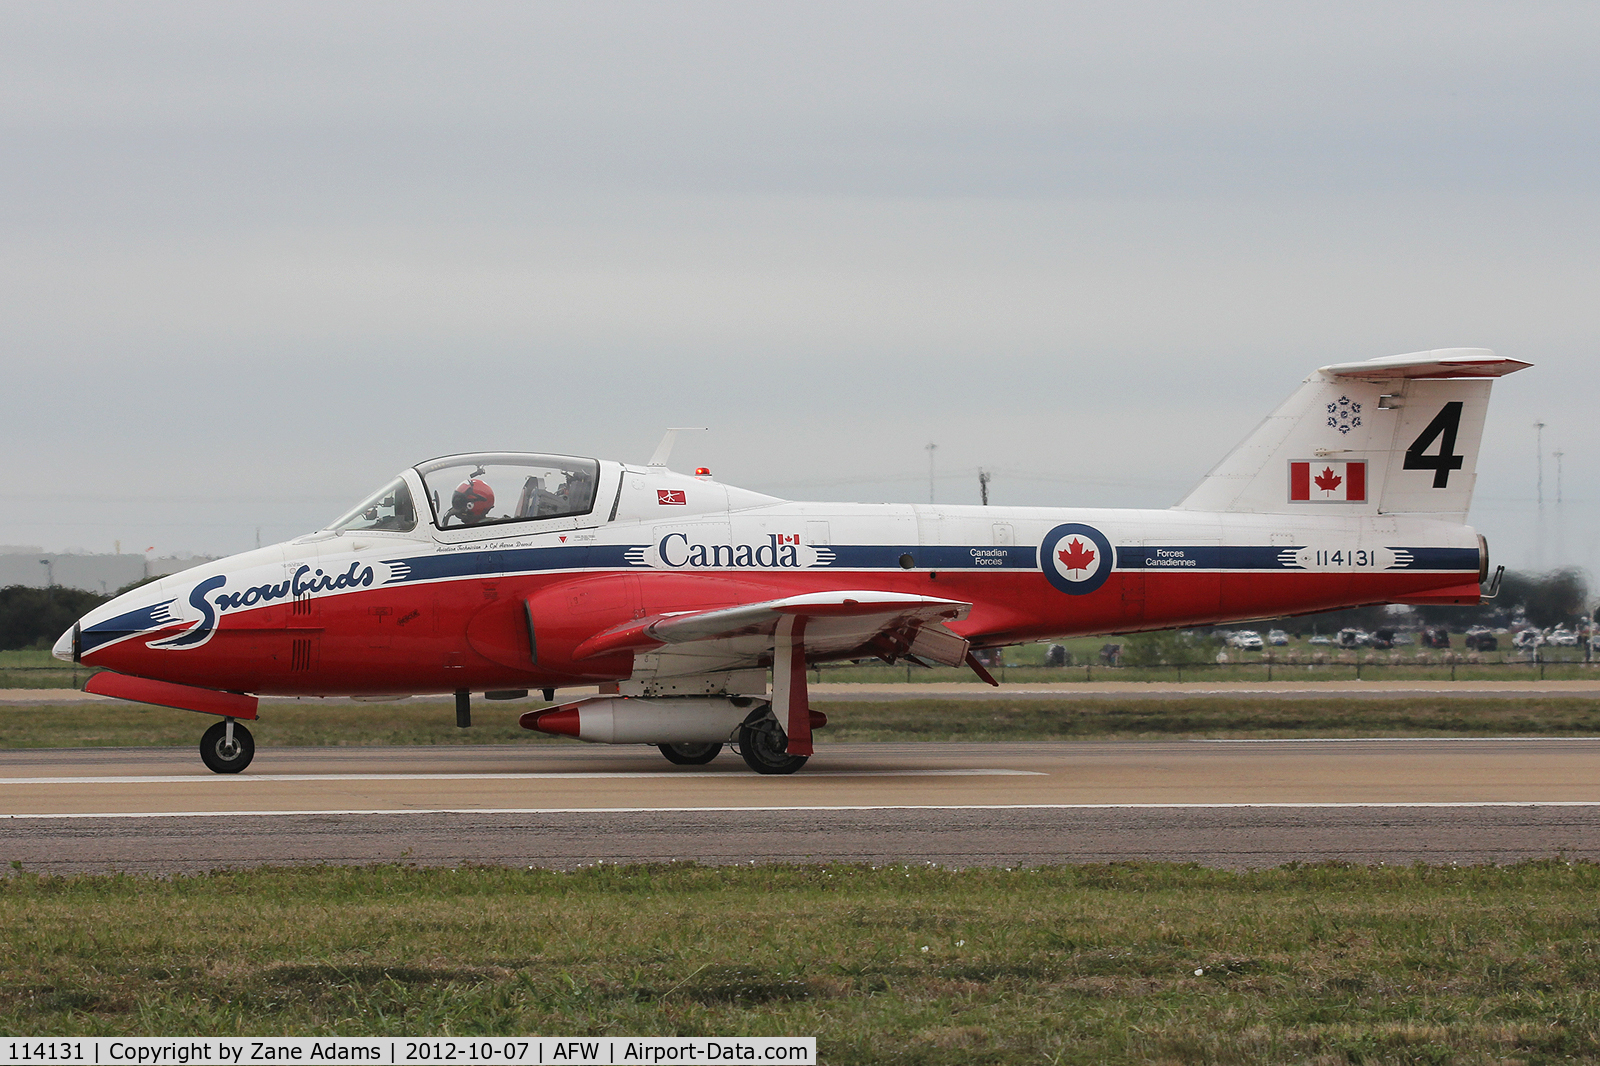 114131, Canadair CT-114 Tutor C/N 1131, At the 2012 Alliance Airshow - Fort Worth, TX